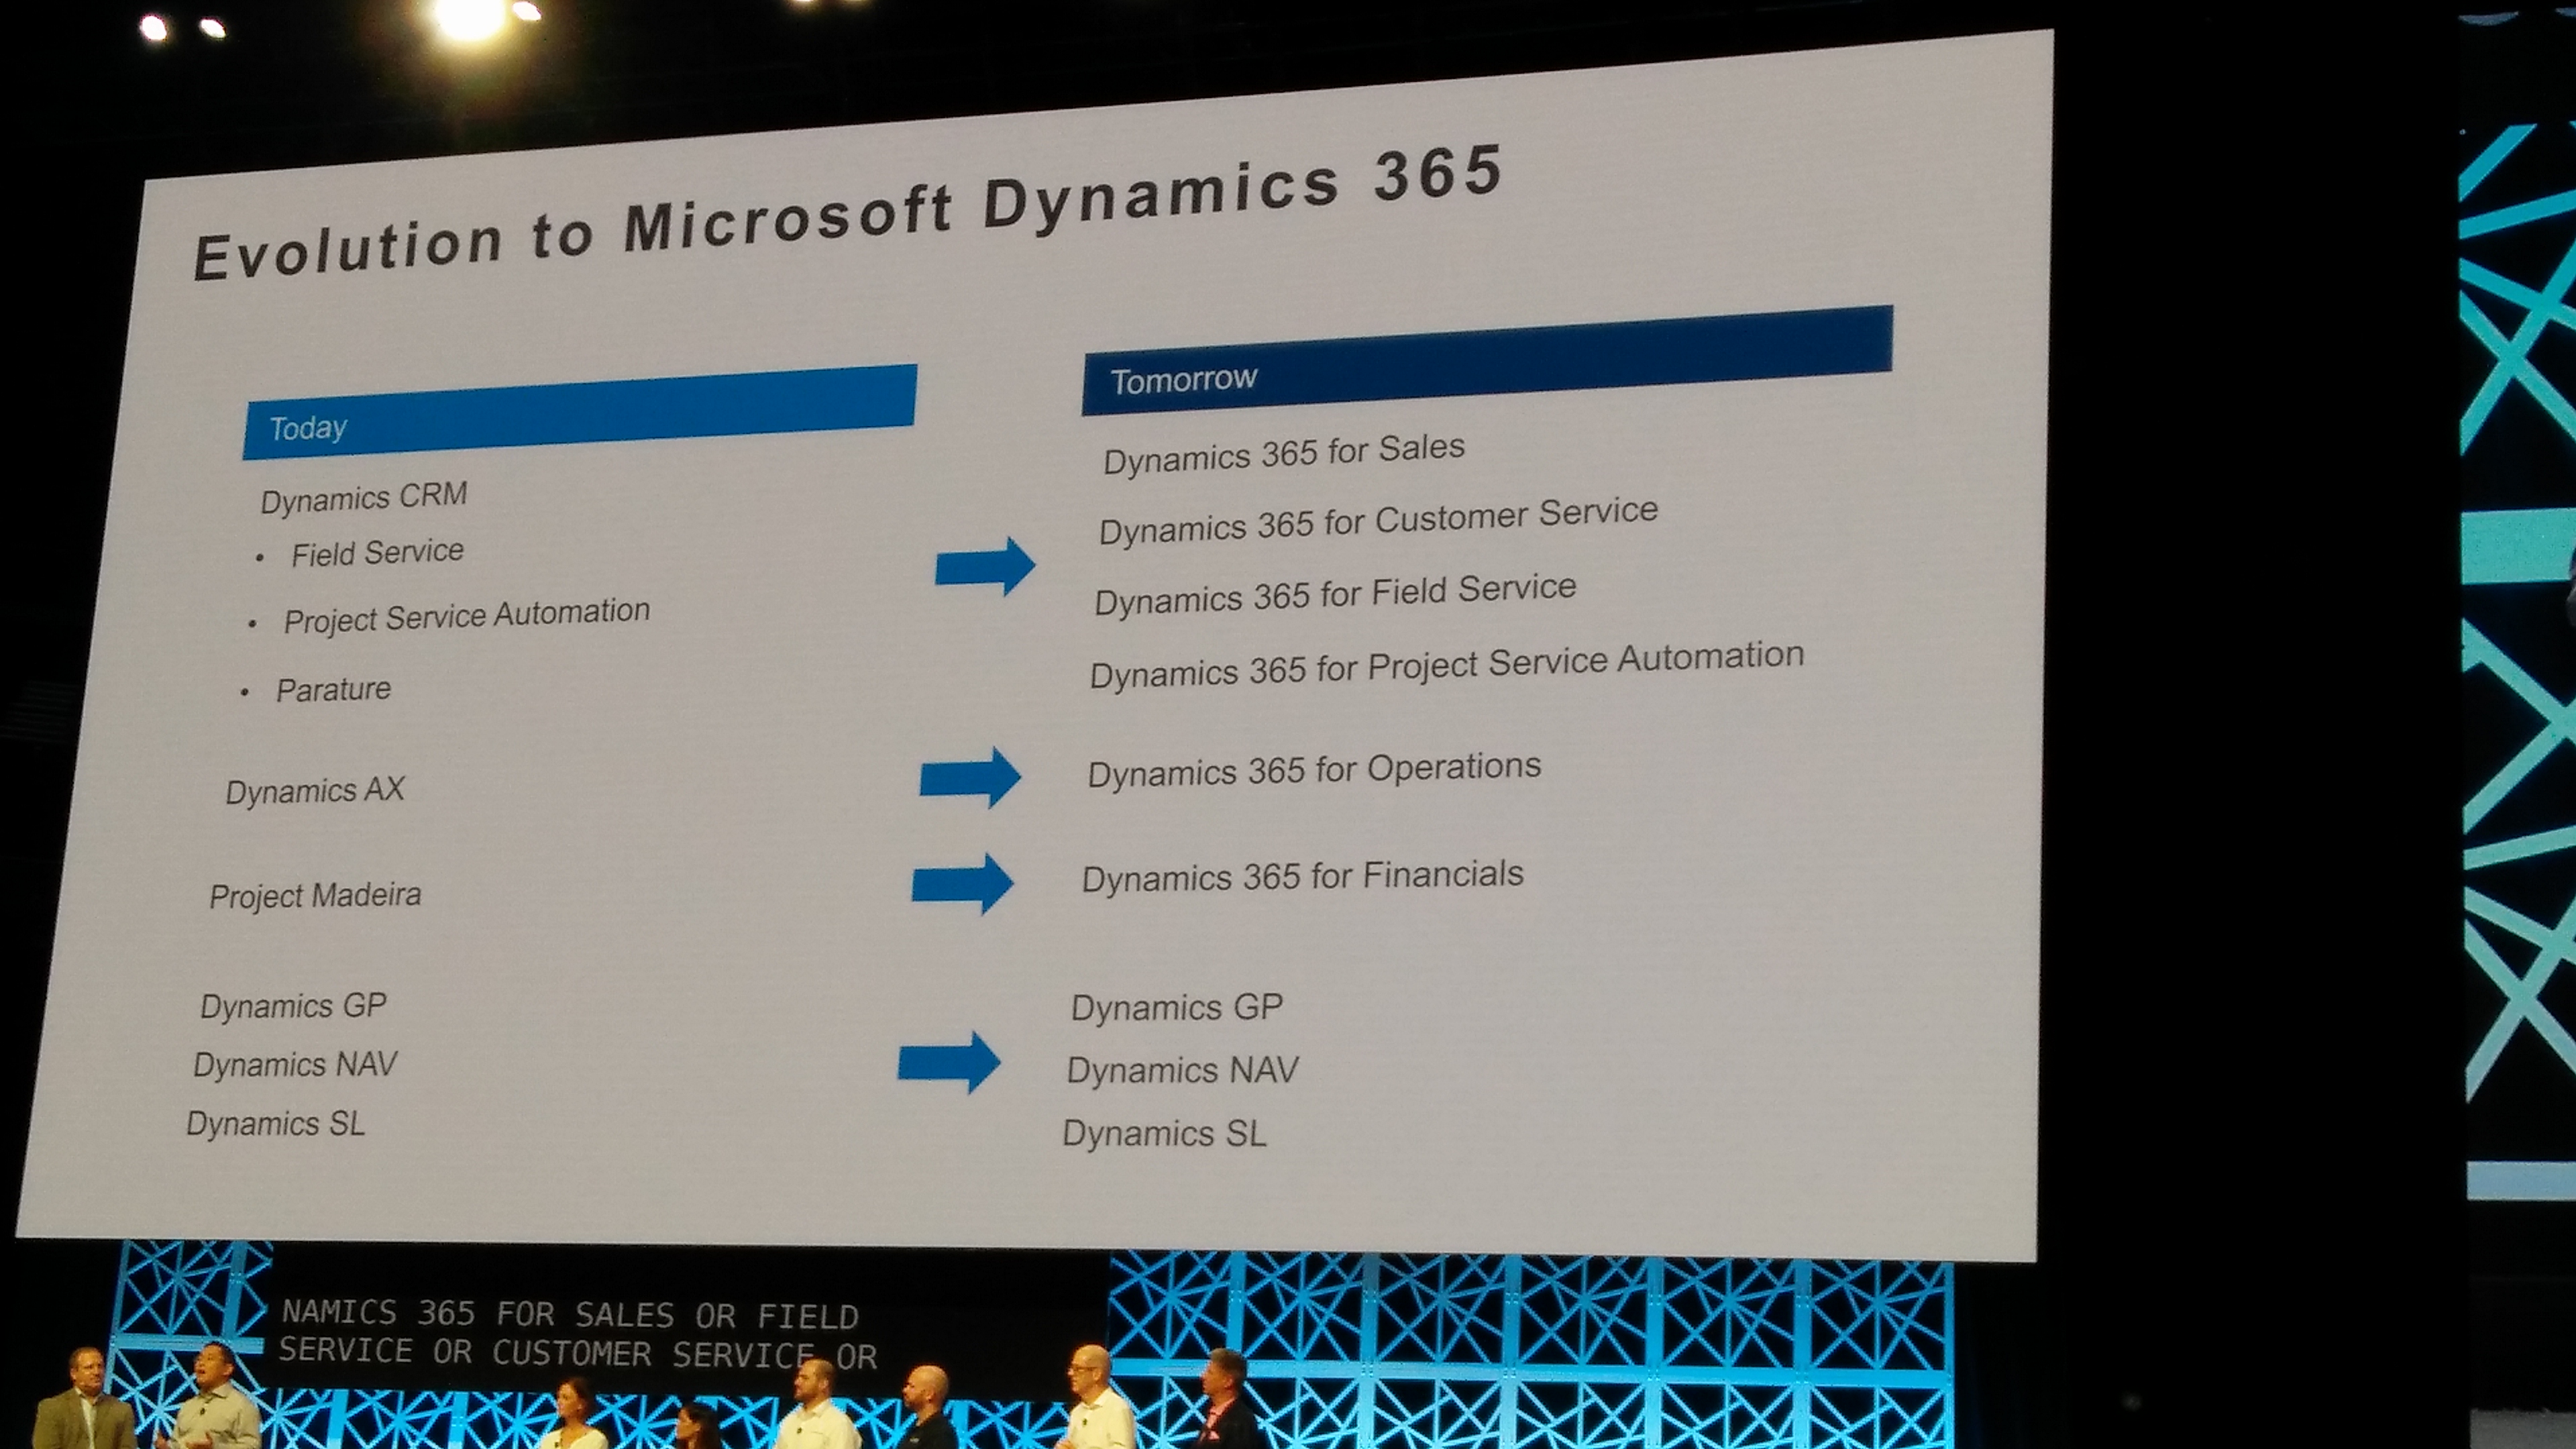 Dynamics 365 names in the future